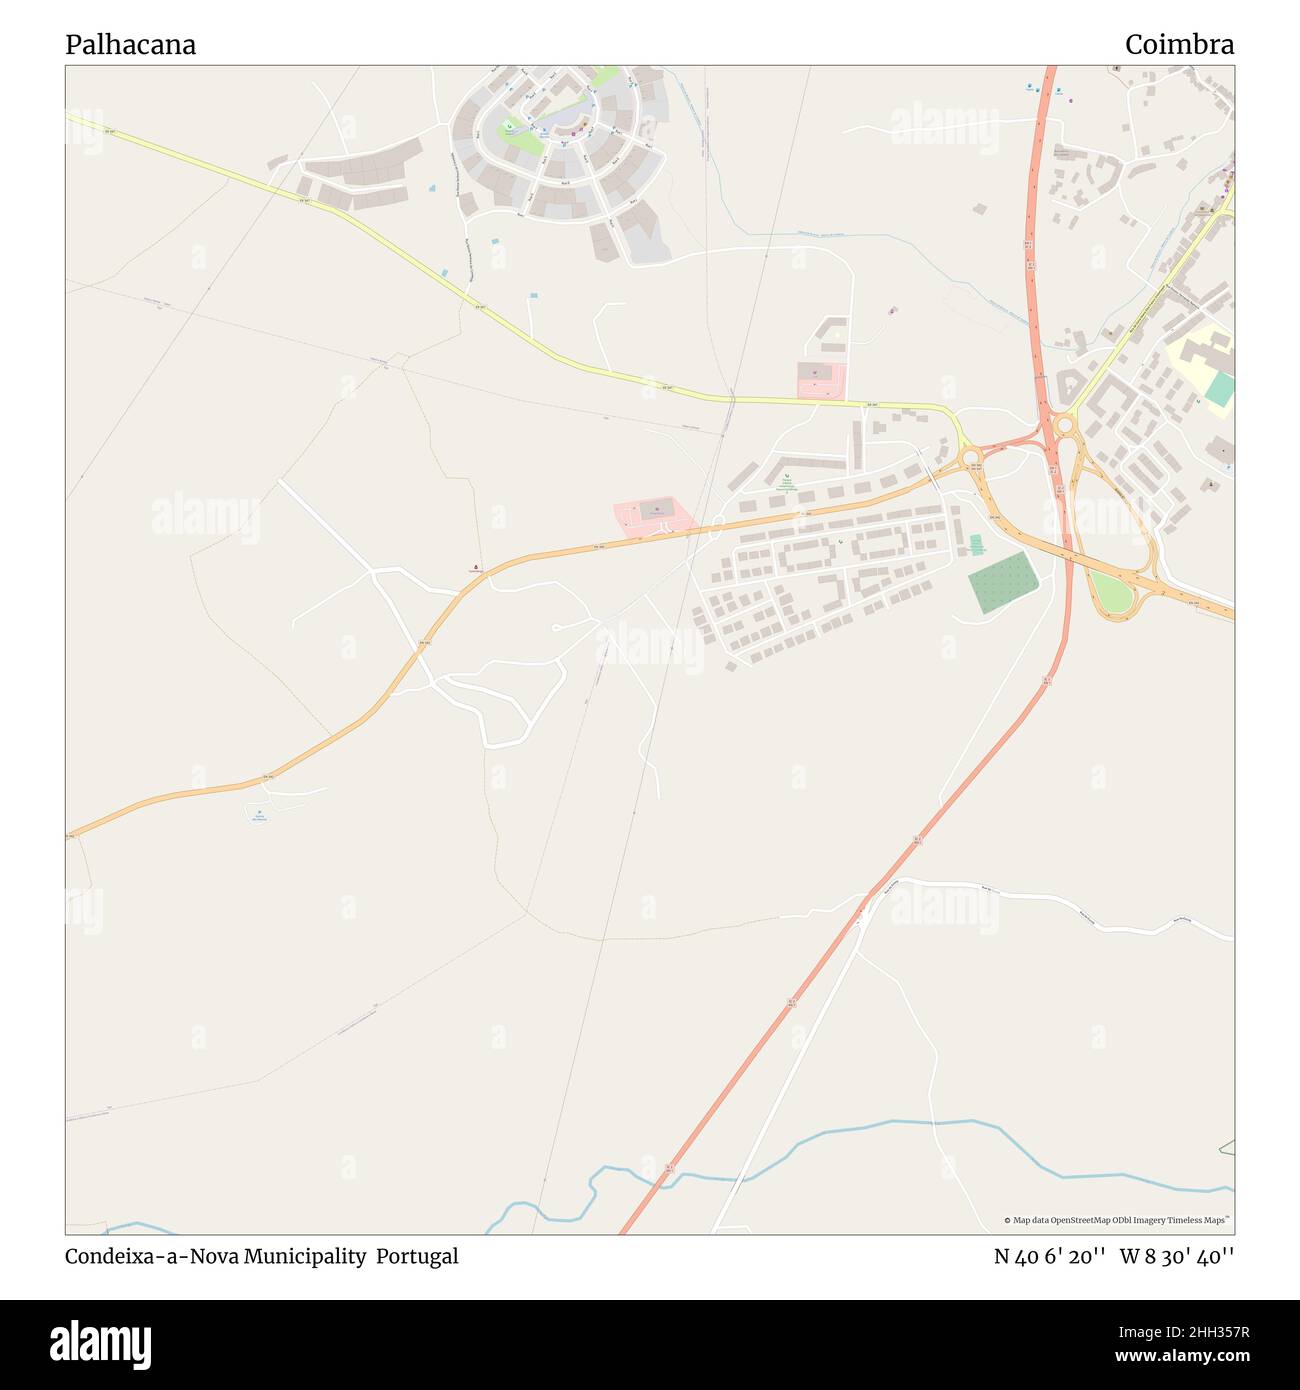 Palhacana, Condeixa-a-Nova Municipality, Portugal, Coimbra, N 40 6' 20'', W 8 30' 40'', map, Timeless Map published in 2021. Travelers, explorers and adventurers like Florence Nightingale, David Livingstone, Ernest Shackleton, Lewis and Clark and Sherlock Holmes relied on maps to plan travels to the world's most remote corners, Timeless Maps is mapping most locations on the globe, showing the achievement of great dreams Stock Photo